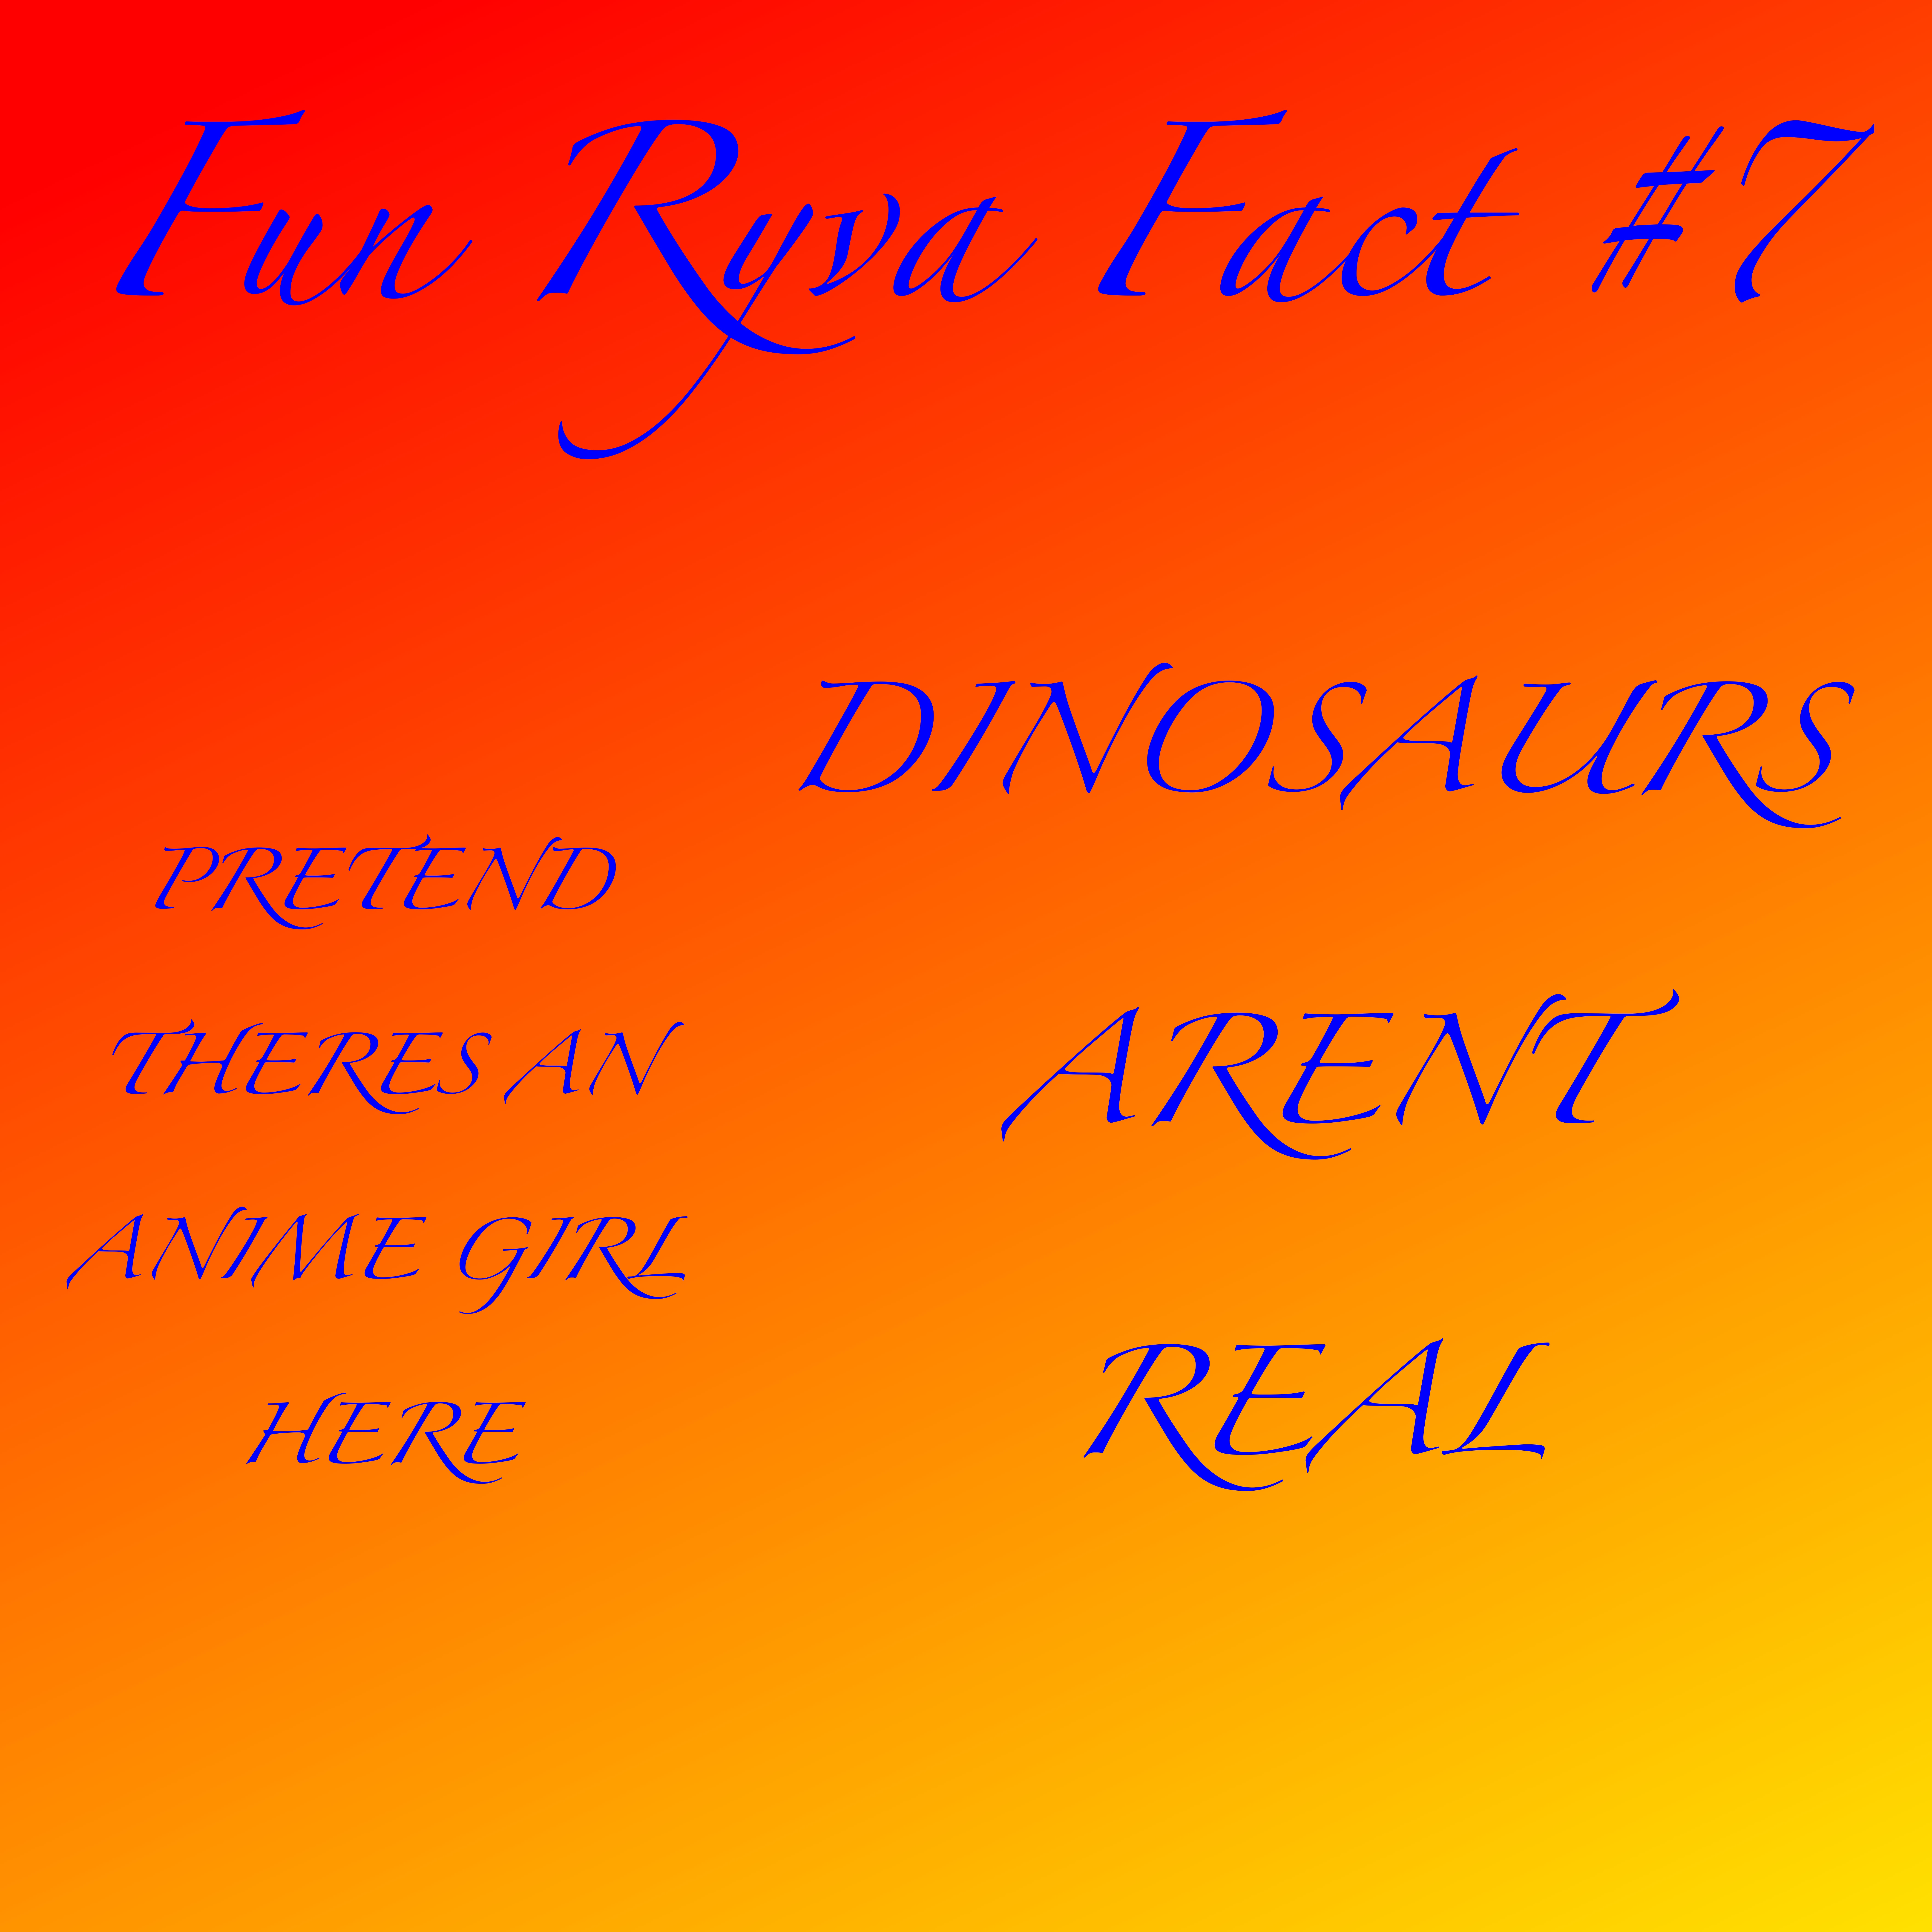 A meme reading "Fun Ryva Fact #7" above text reading "PRETEND THERES AN ANIME GIRL HERE" and "DINOSAURS ARENT REAL".